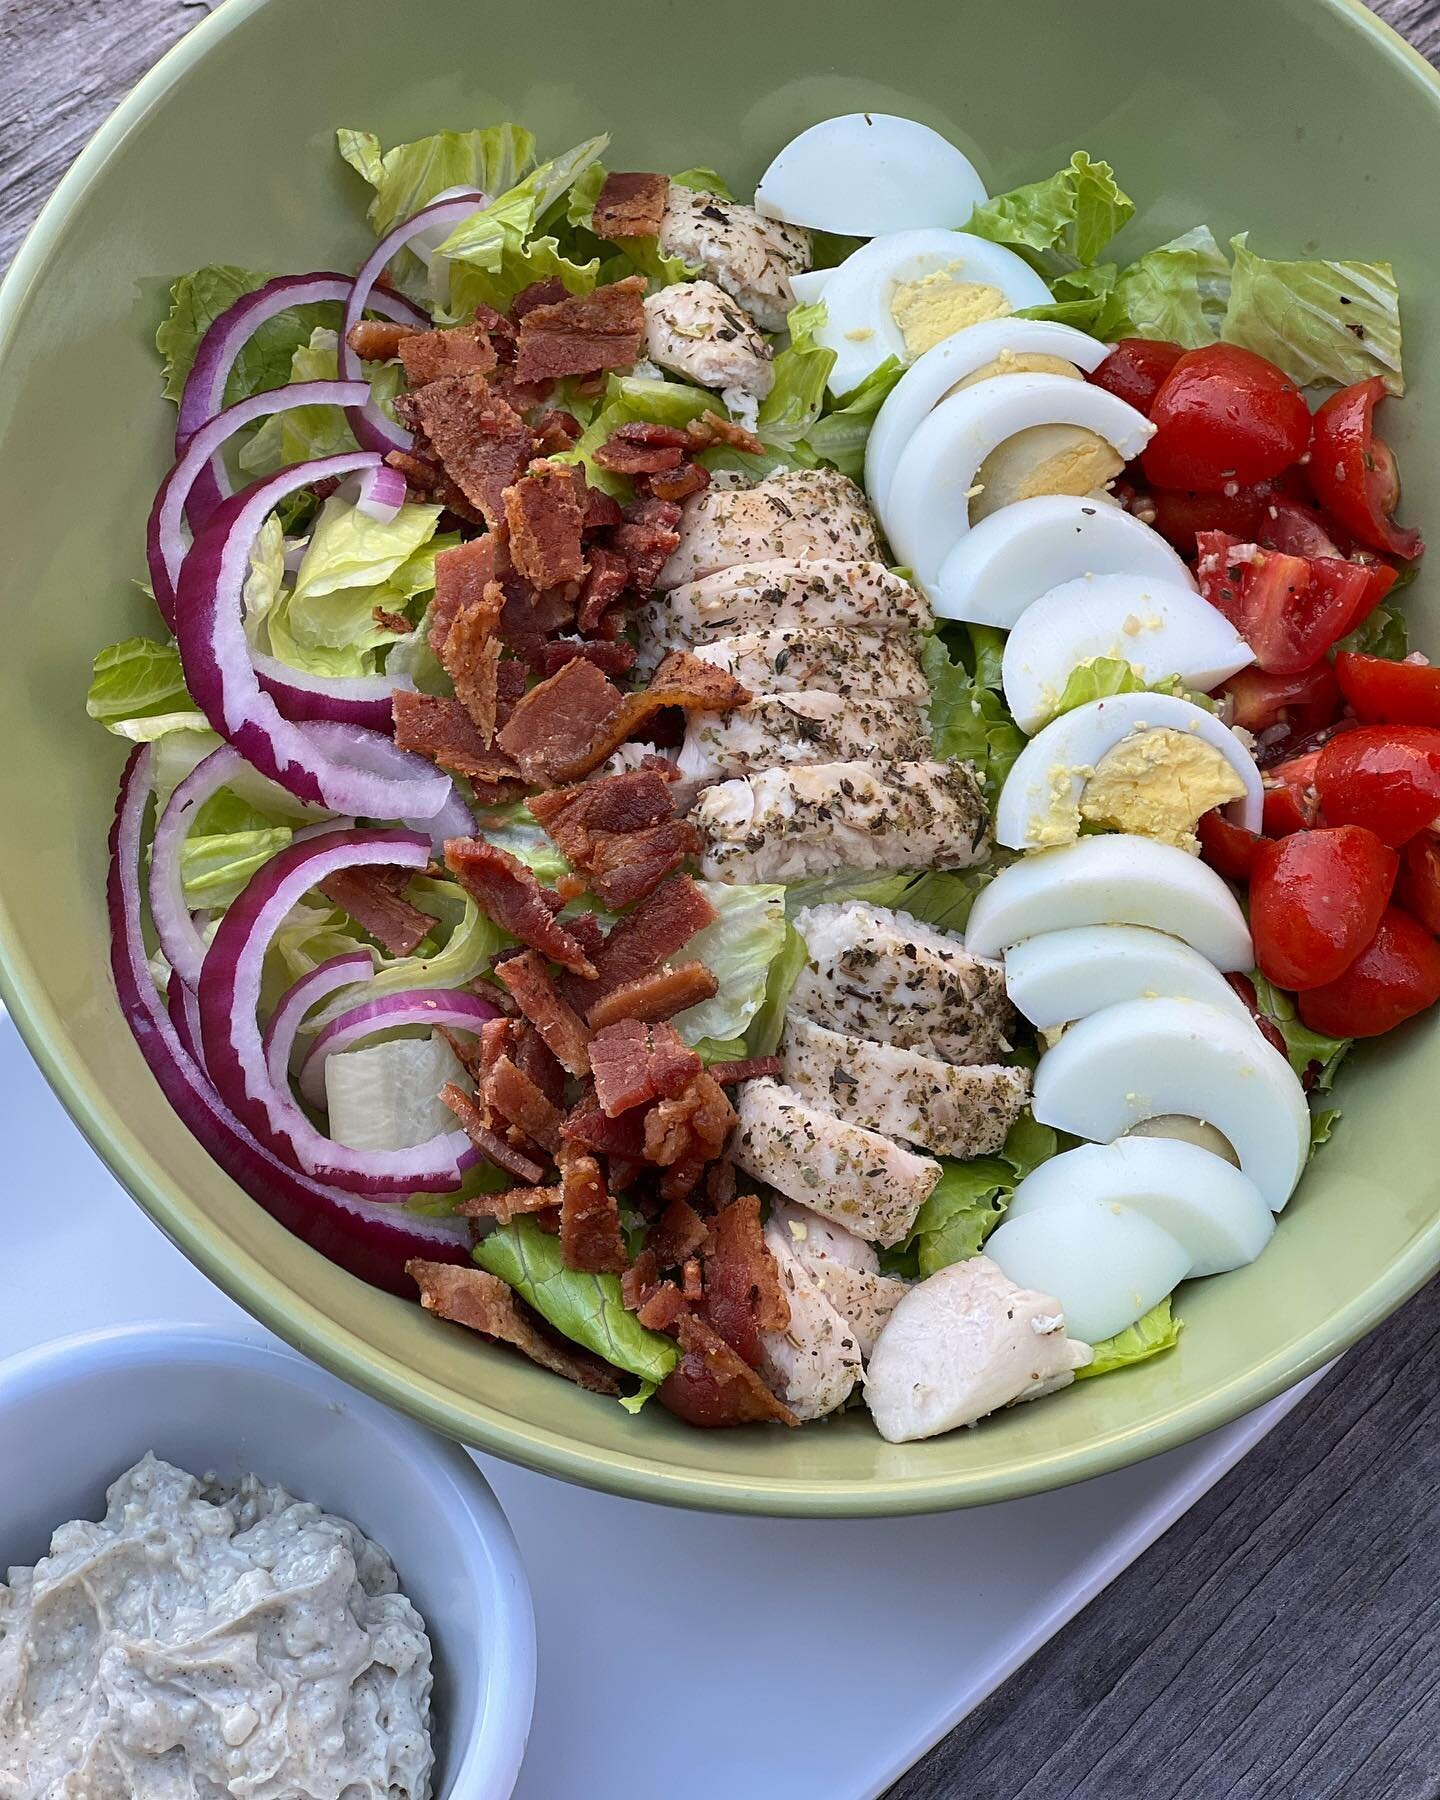 Beautiful day for a lunch date. Chicken Cobb Salad is on the menu today. 

Grilled chicken, our house-made bruschetta, crispy bacon, hard boiled eggs, red onions served over romaine lettuce with a house-made blue cheese dressing. 

We brought back th